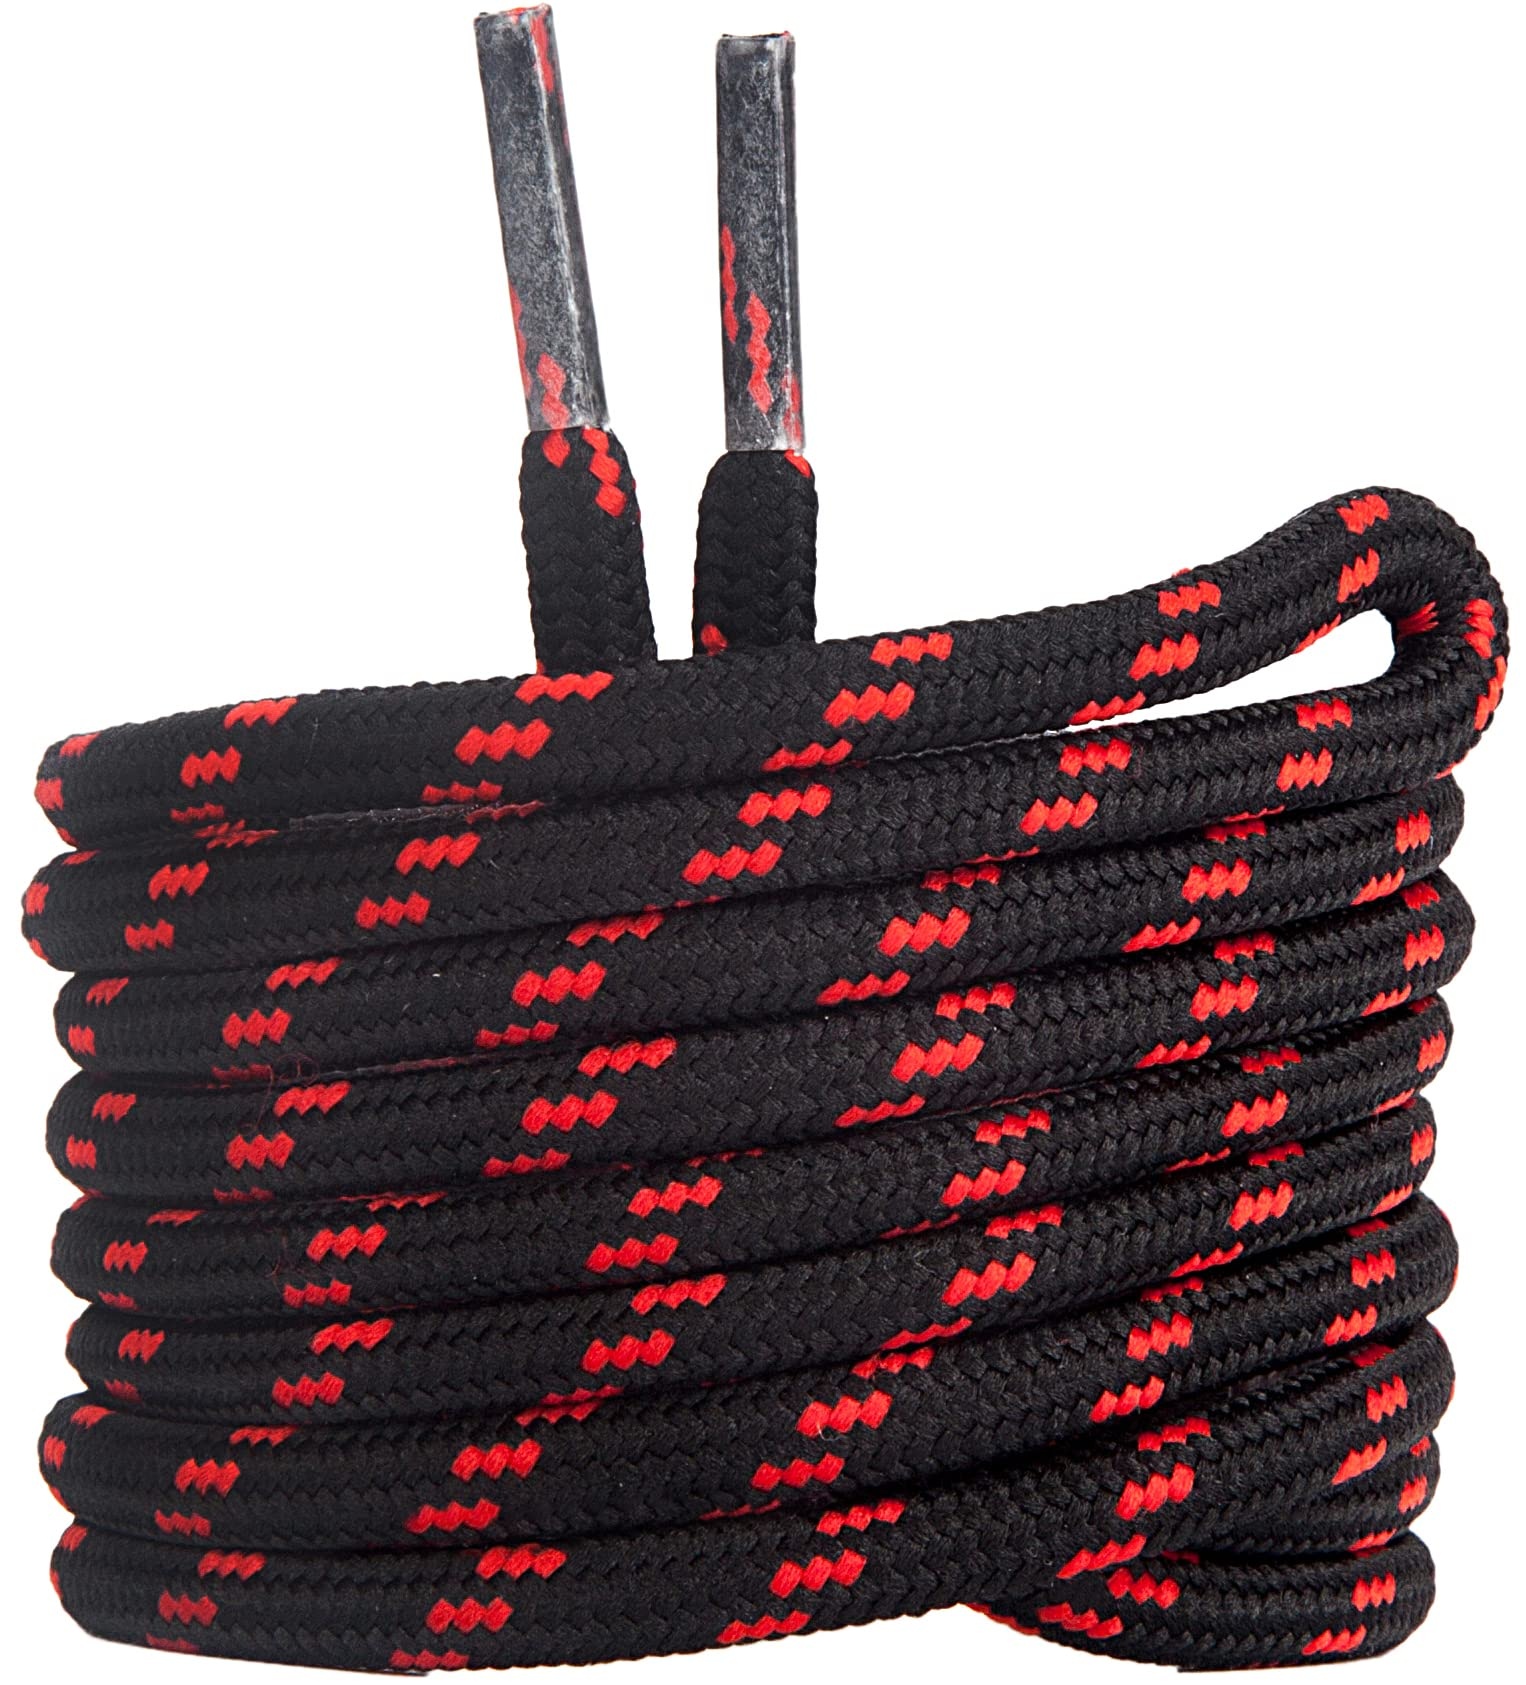 Tolumo Diameter 4.5 MM Round Durable Boot Laces Lengths 100 to 160 CM Shoelaces for Work and Leisure Boots, Hiking Shoes Black Red 140 CM 1 Pair - 140cm - 1 Pair